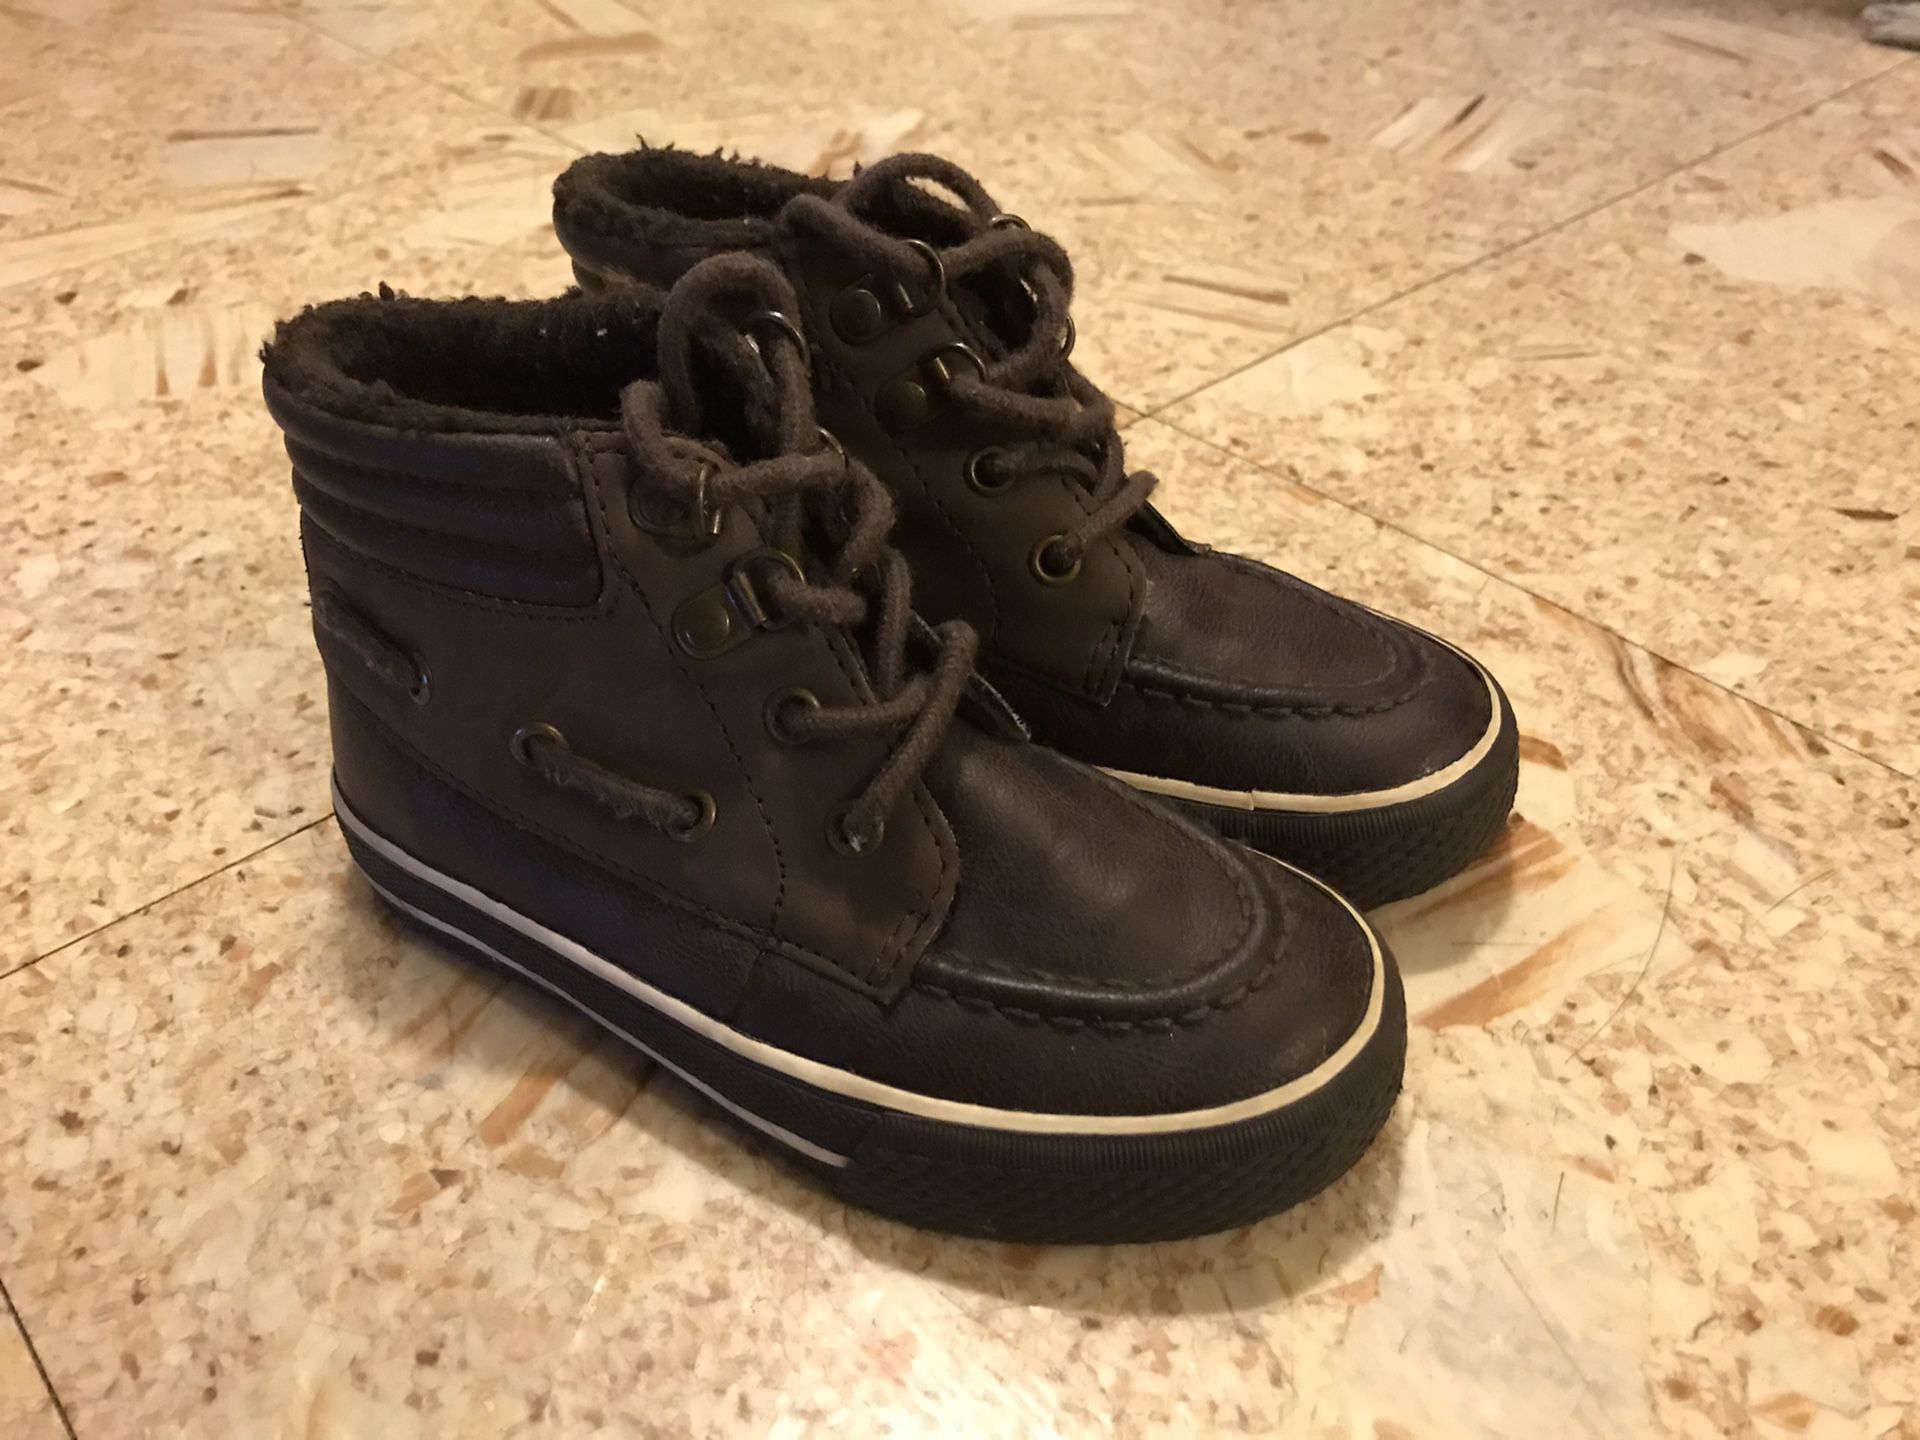 Kids boys leather boots size 10